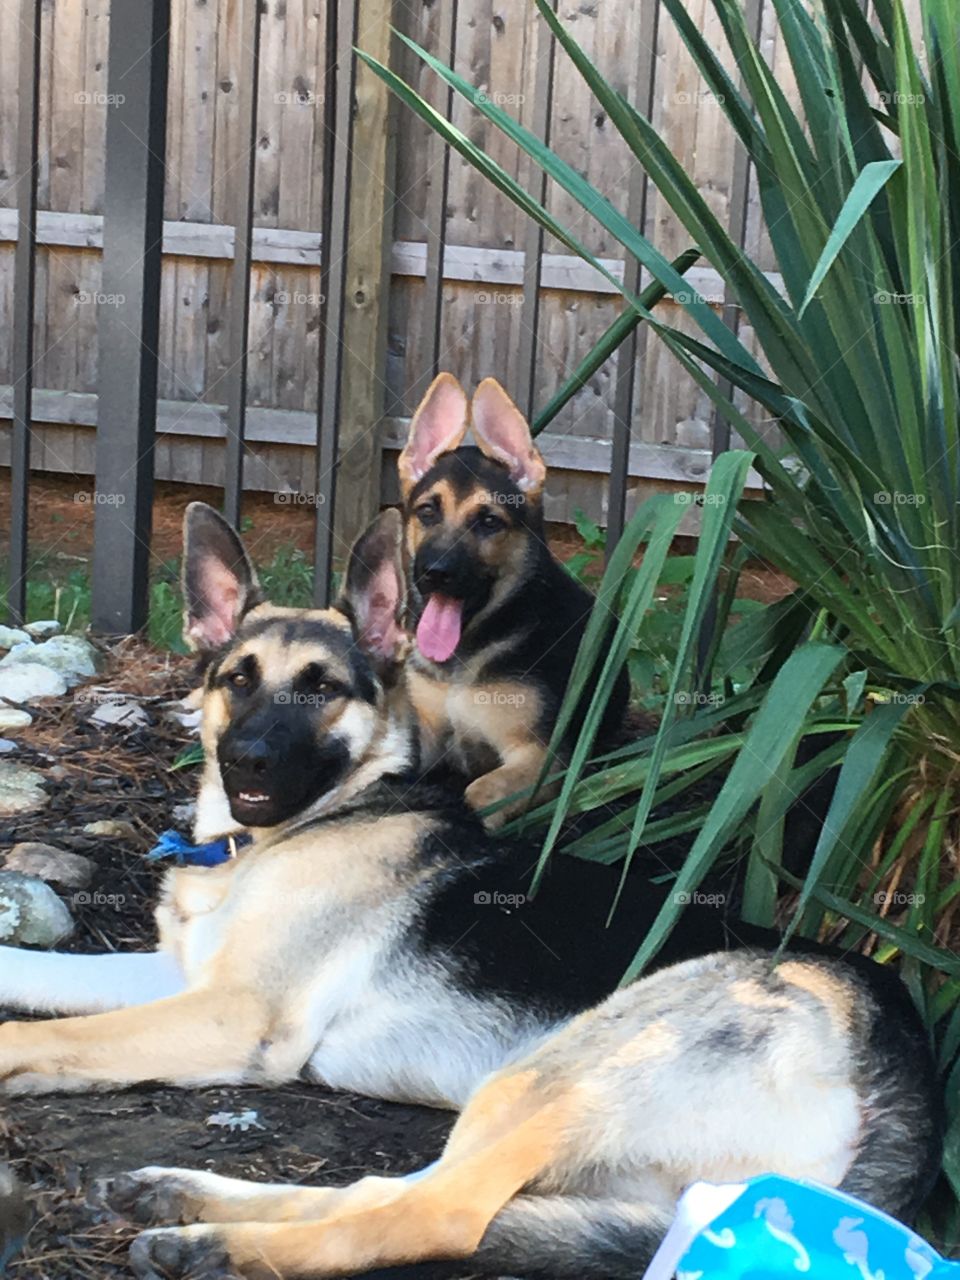 Make and Female Companion GSD
Puppies!
